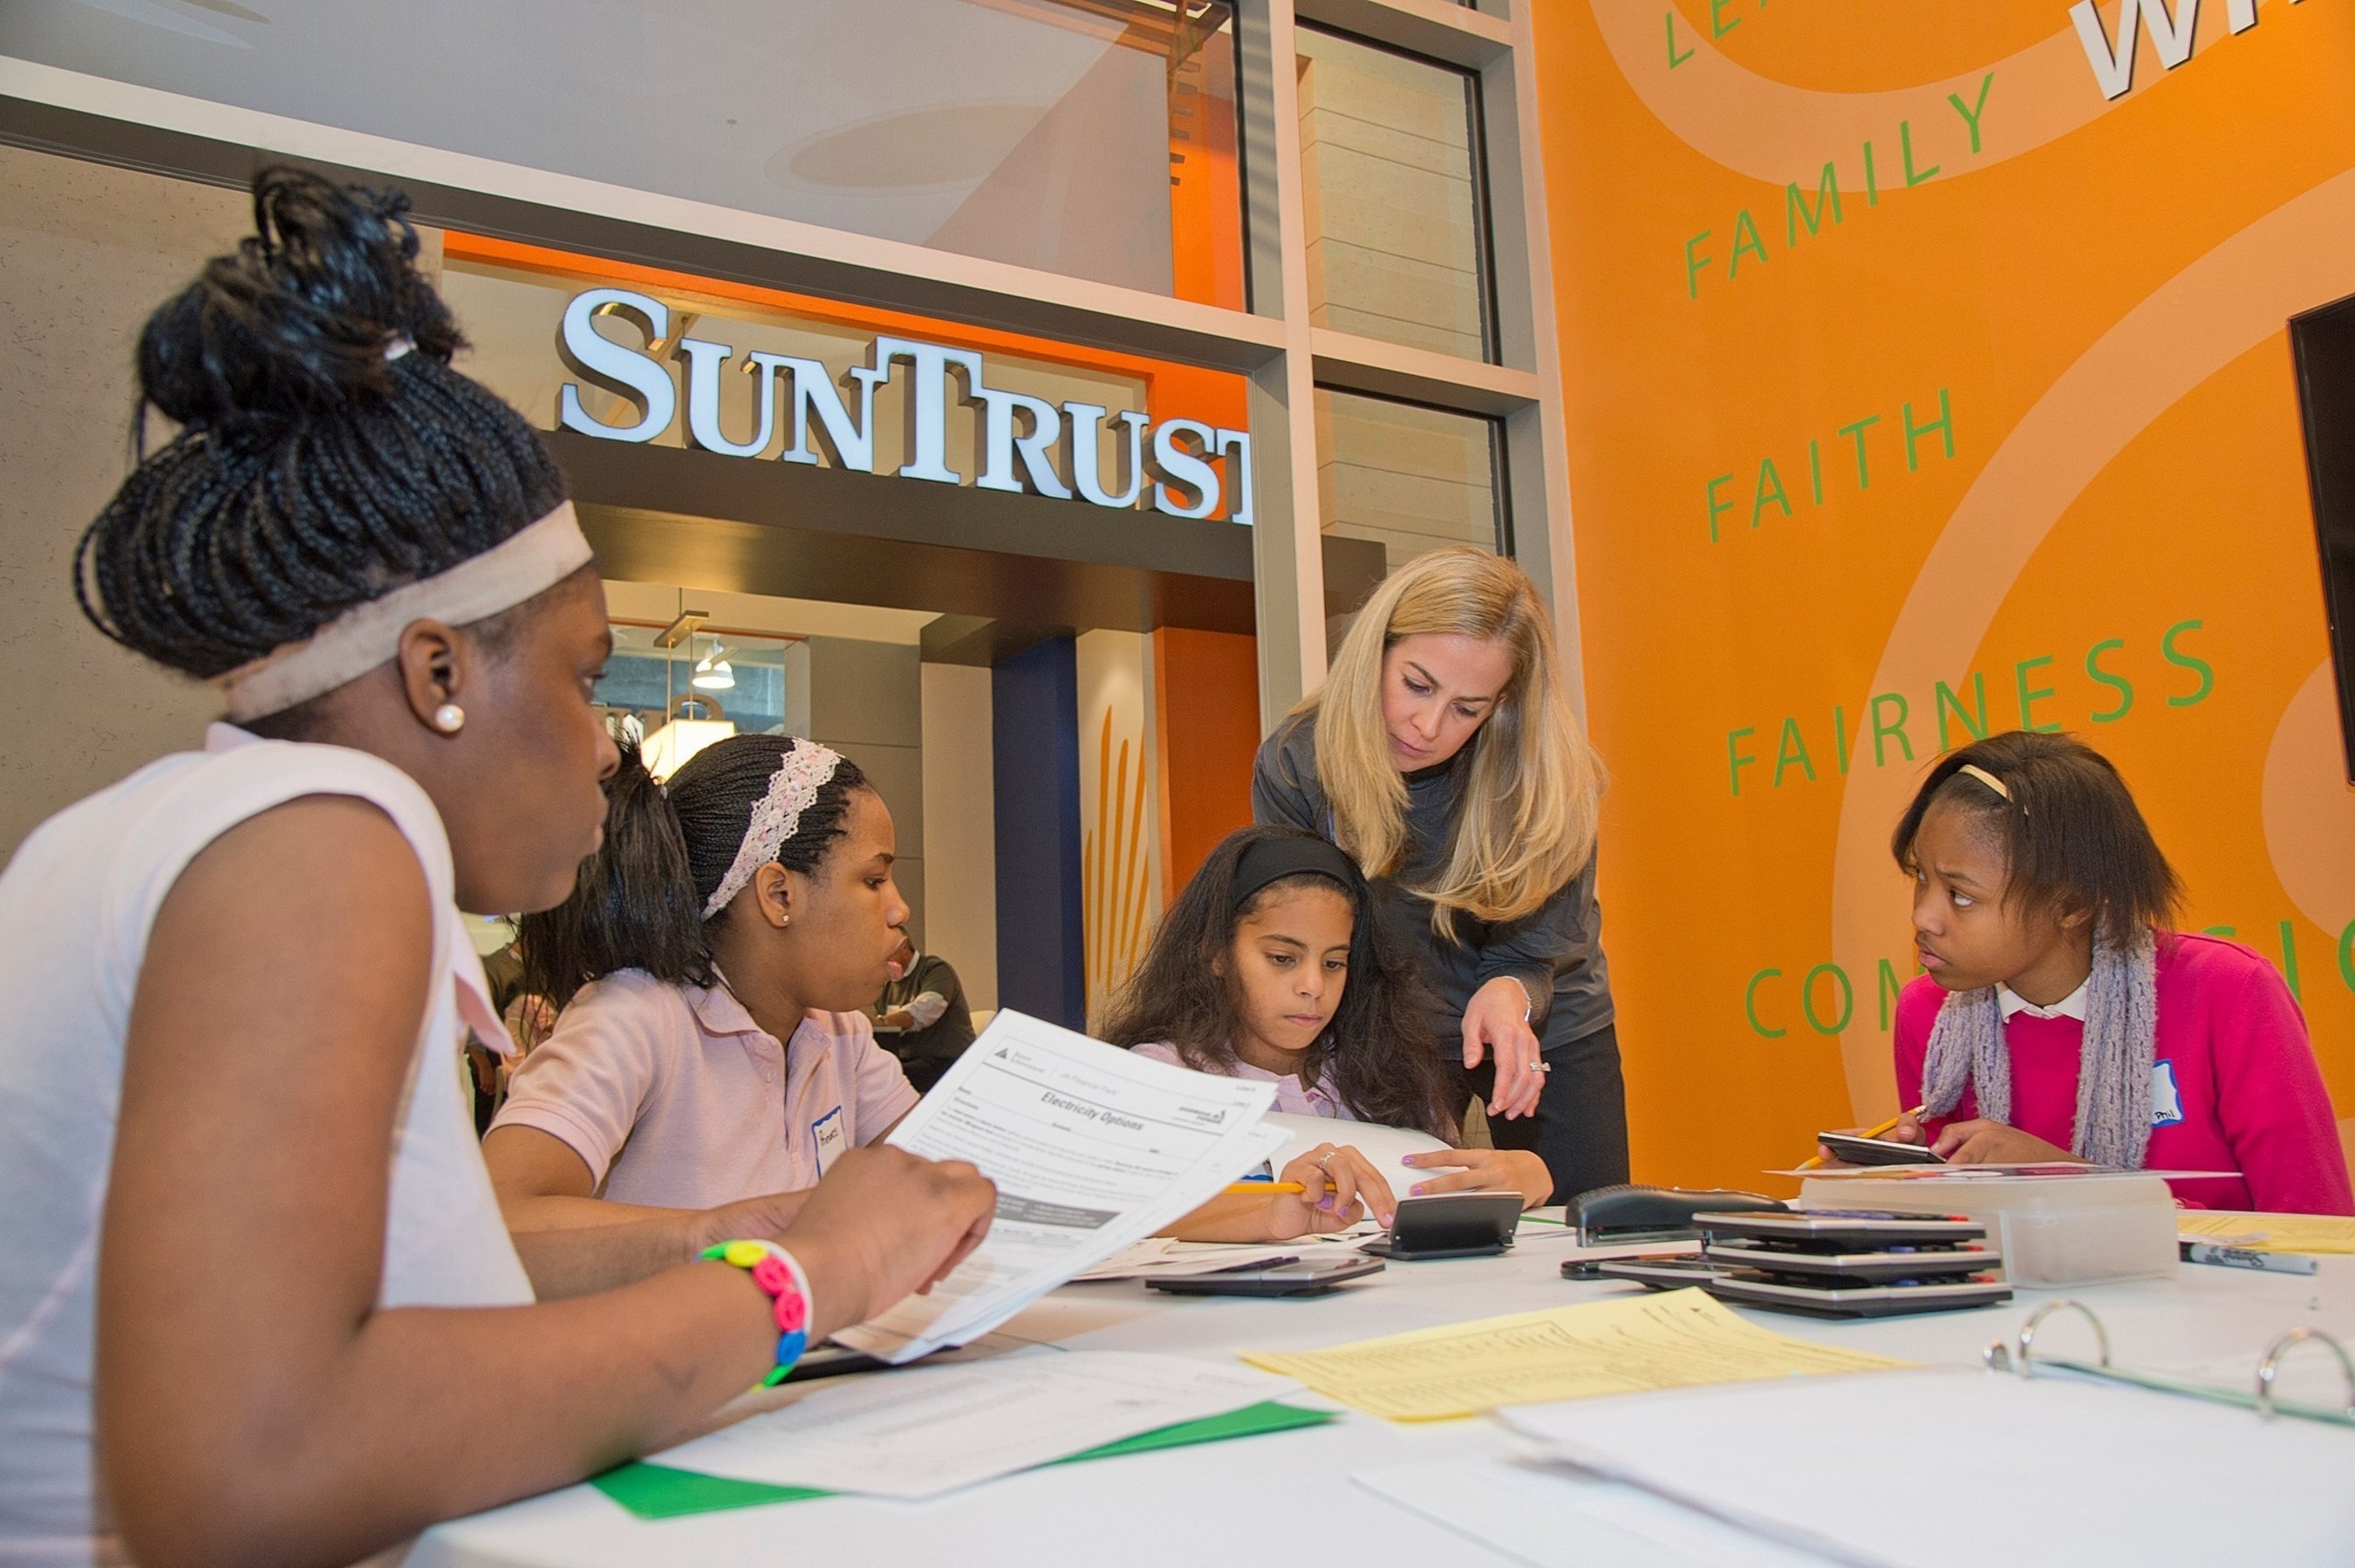 SunTrust teammates' volunteer efforts often focus on organizations that support financial education, where they share the value of planning, budgeting and making sound financial decisions.